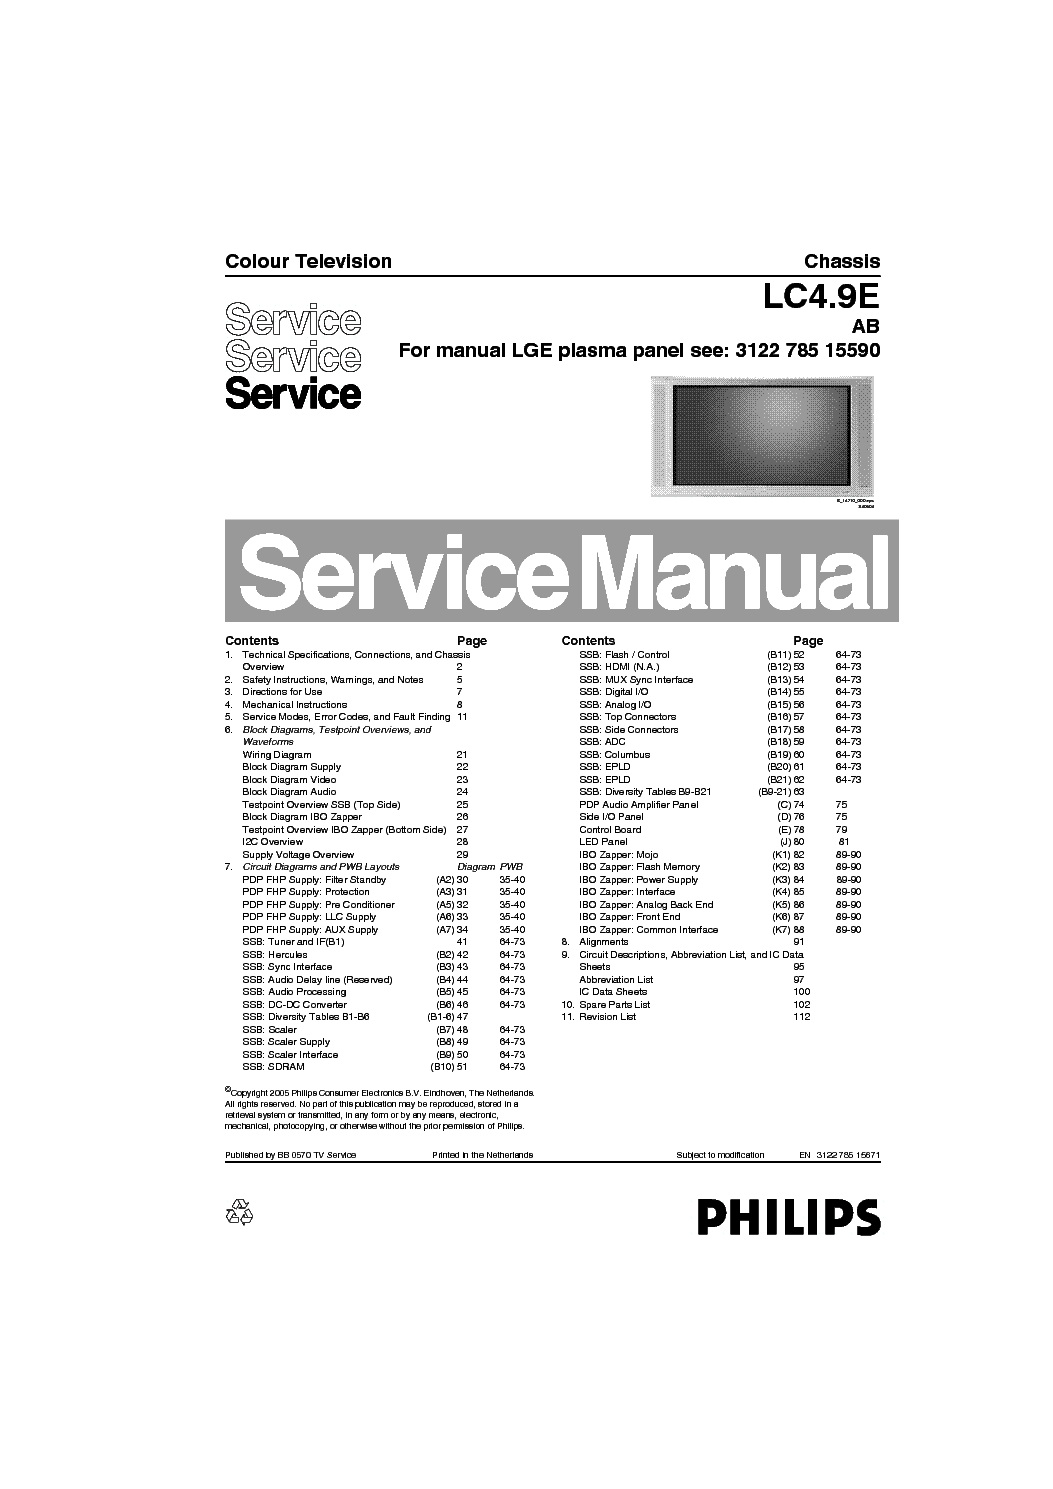 PHILIPS LC4.9EAB 312278515671 service manual (1st page)